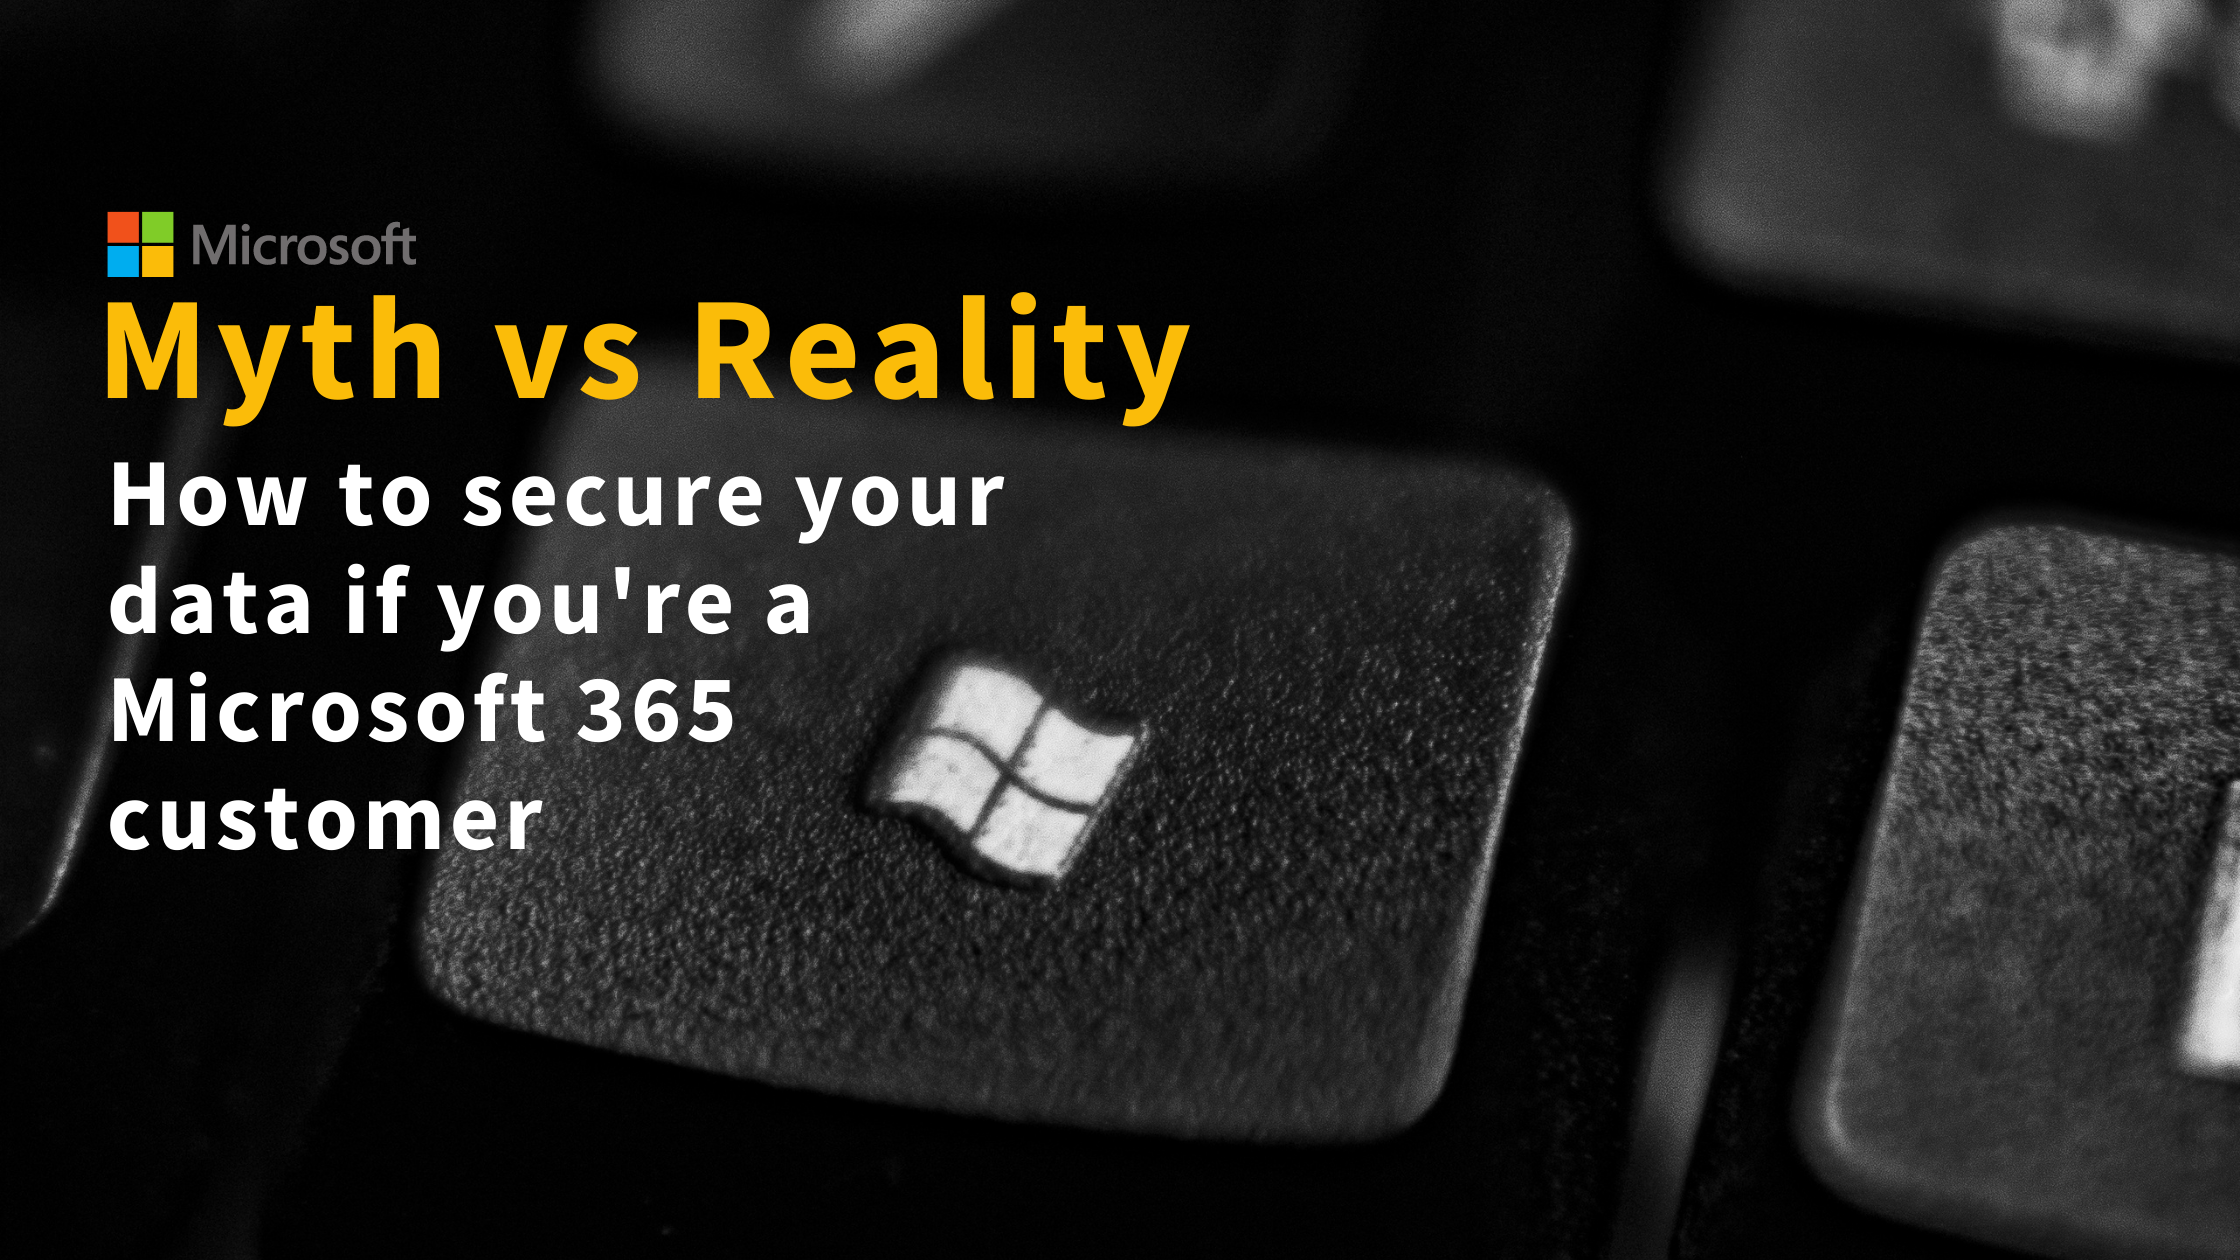 Microsoft 365 isn’t responsible for your data – here’s how to secure and recovery it